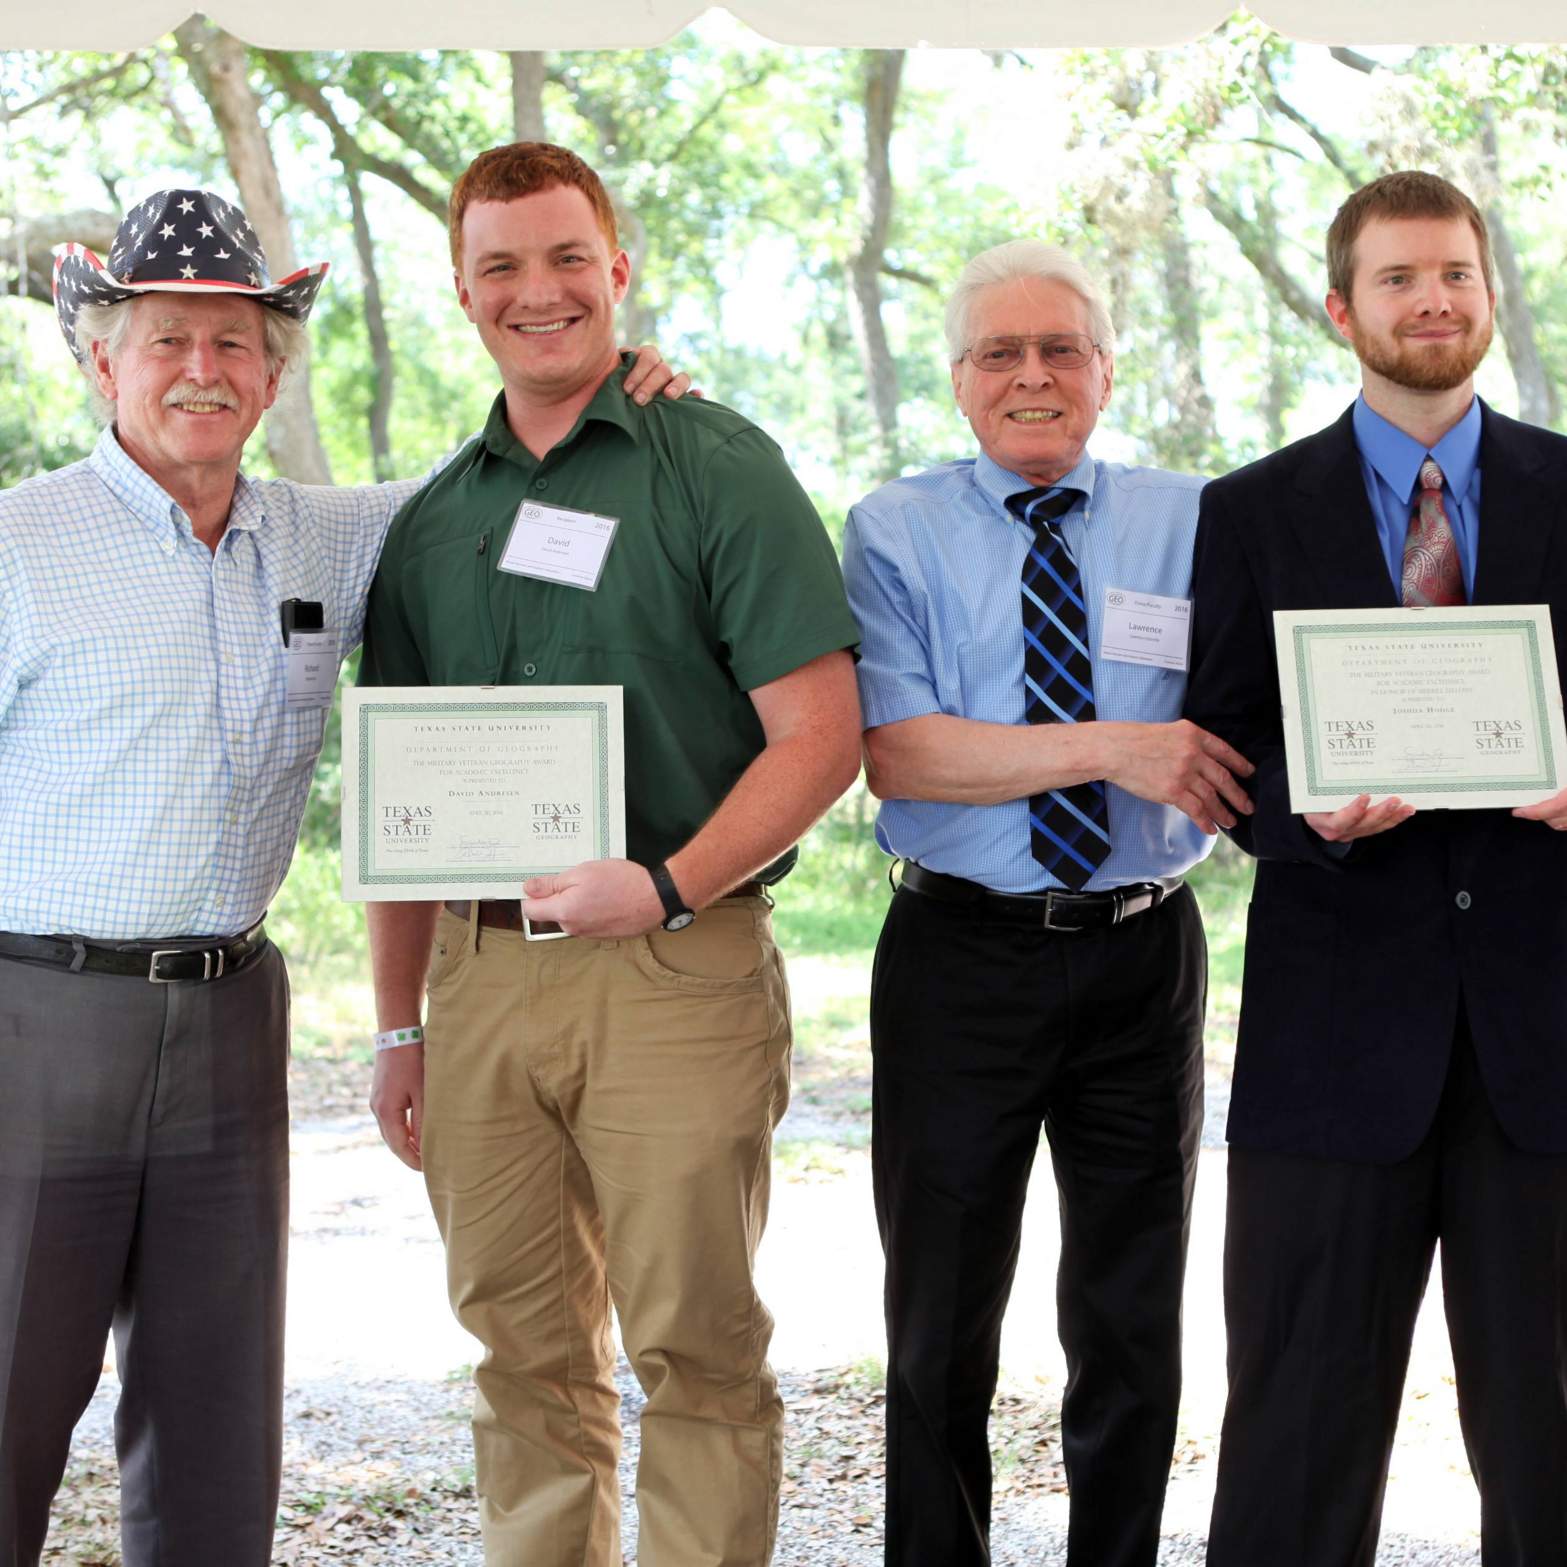 r_DAndresen_and_JHodge-The_Military_Veteran_Geog_Award_for_Academic_Excellence